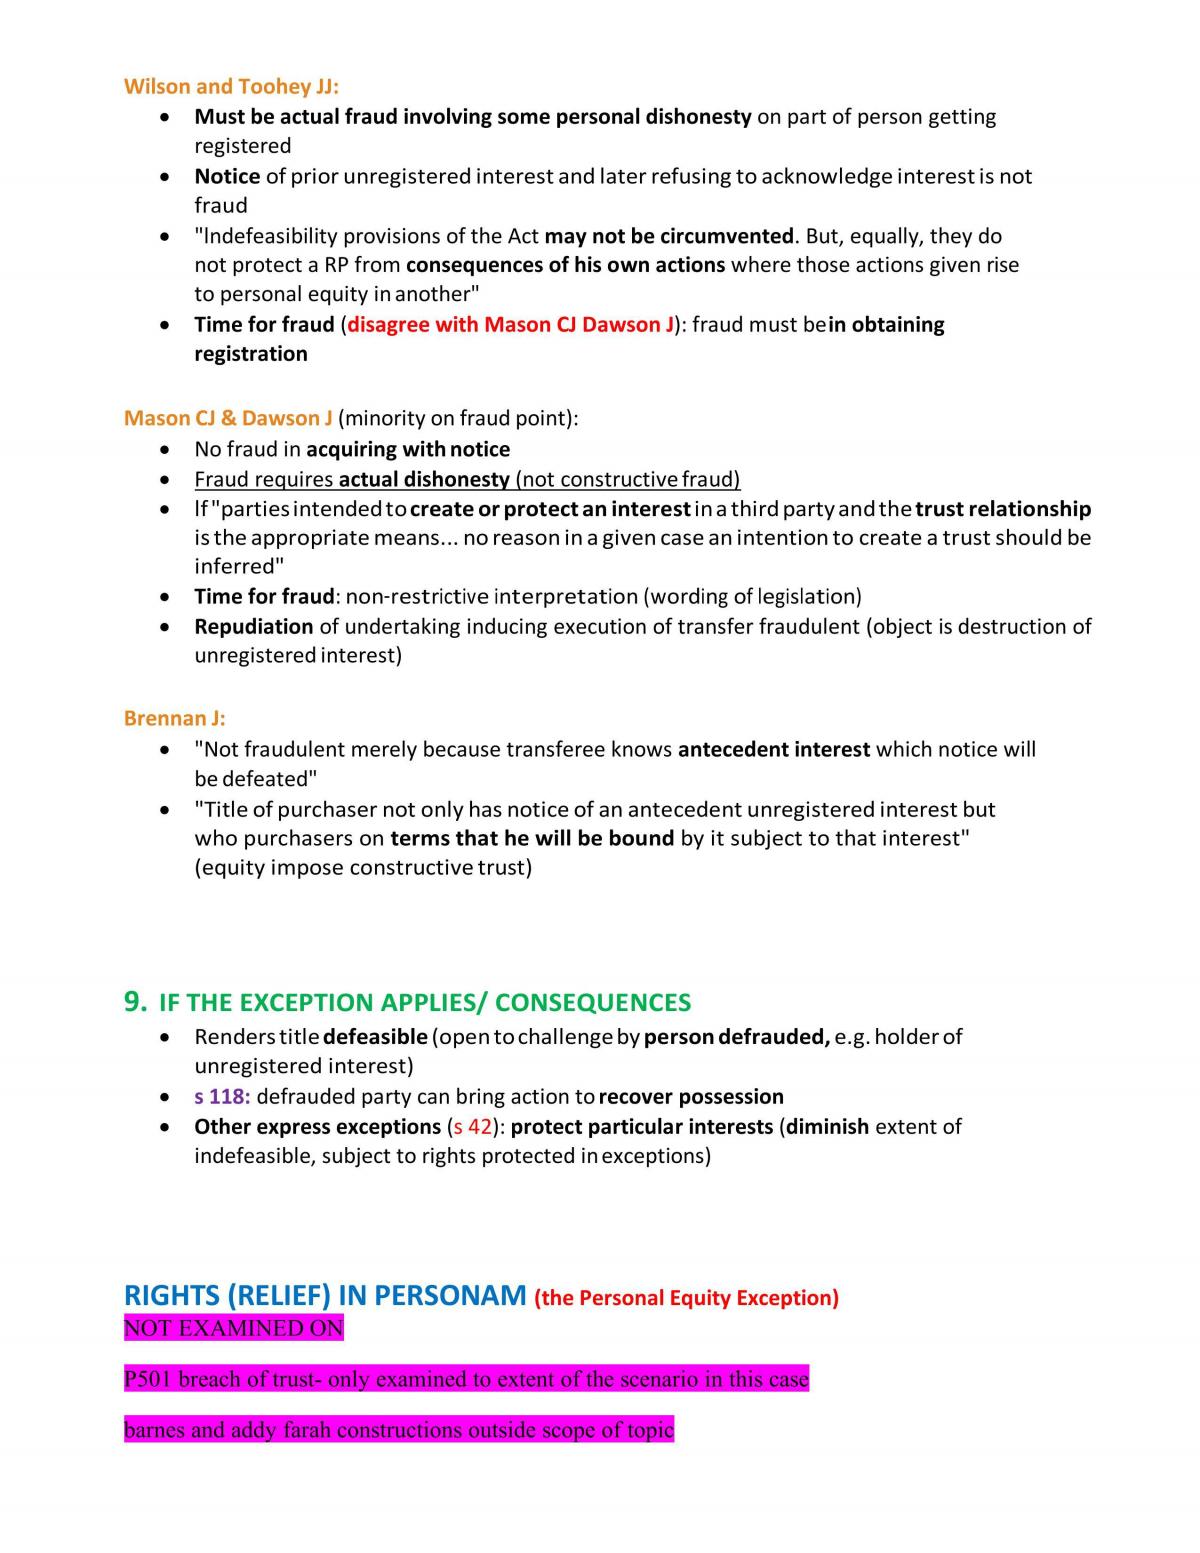 Real Property Final Exam Notes - Page 46